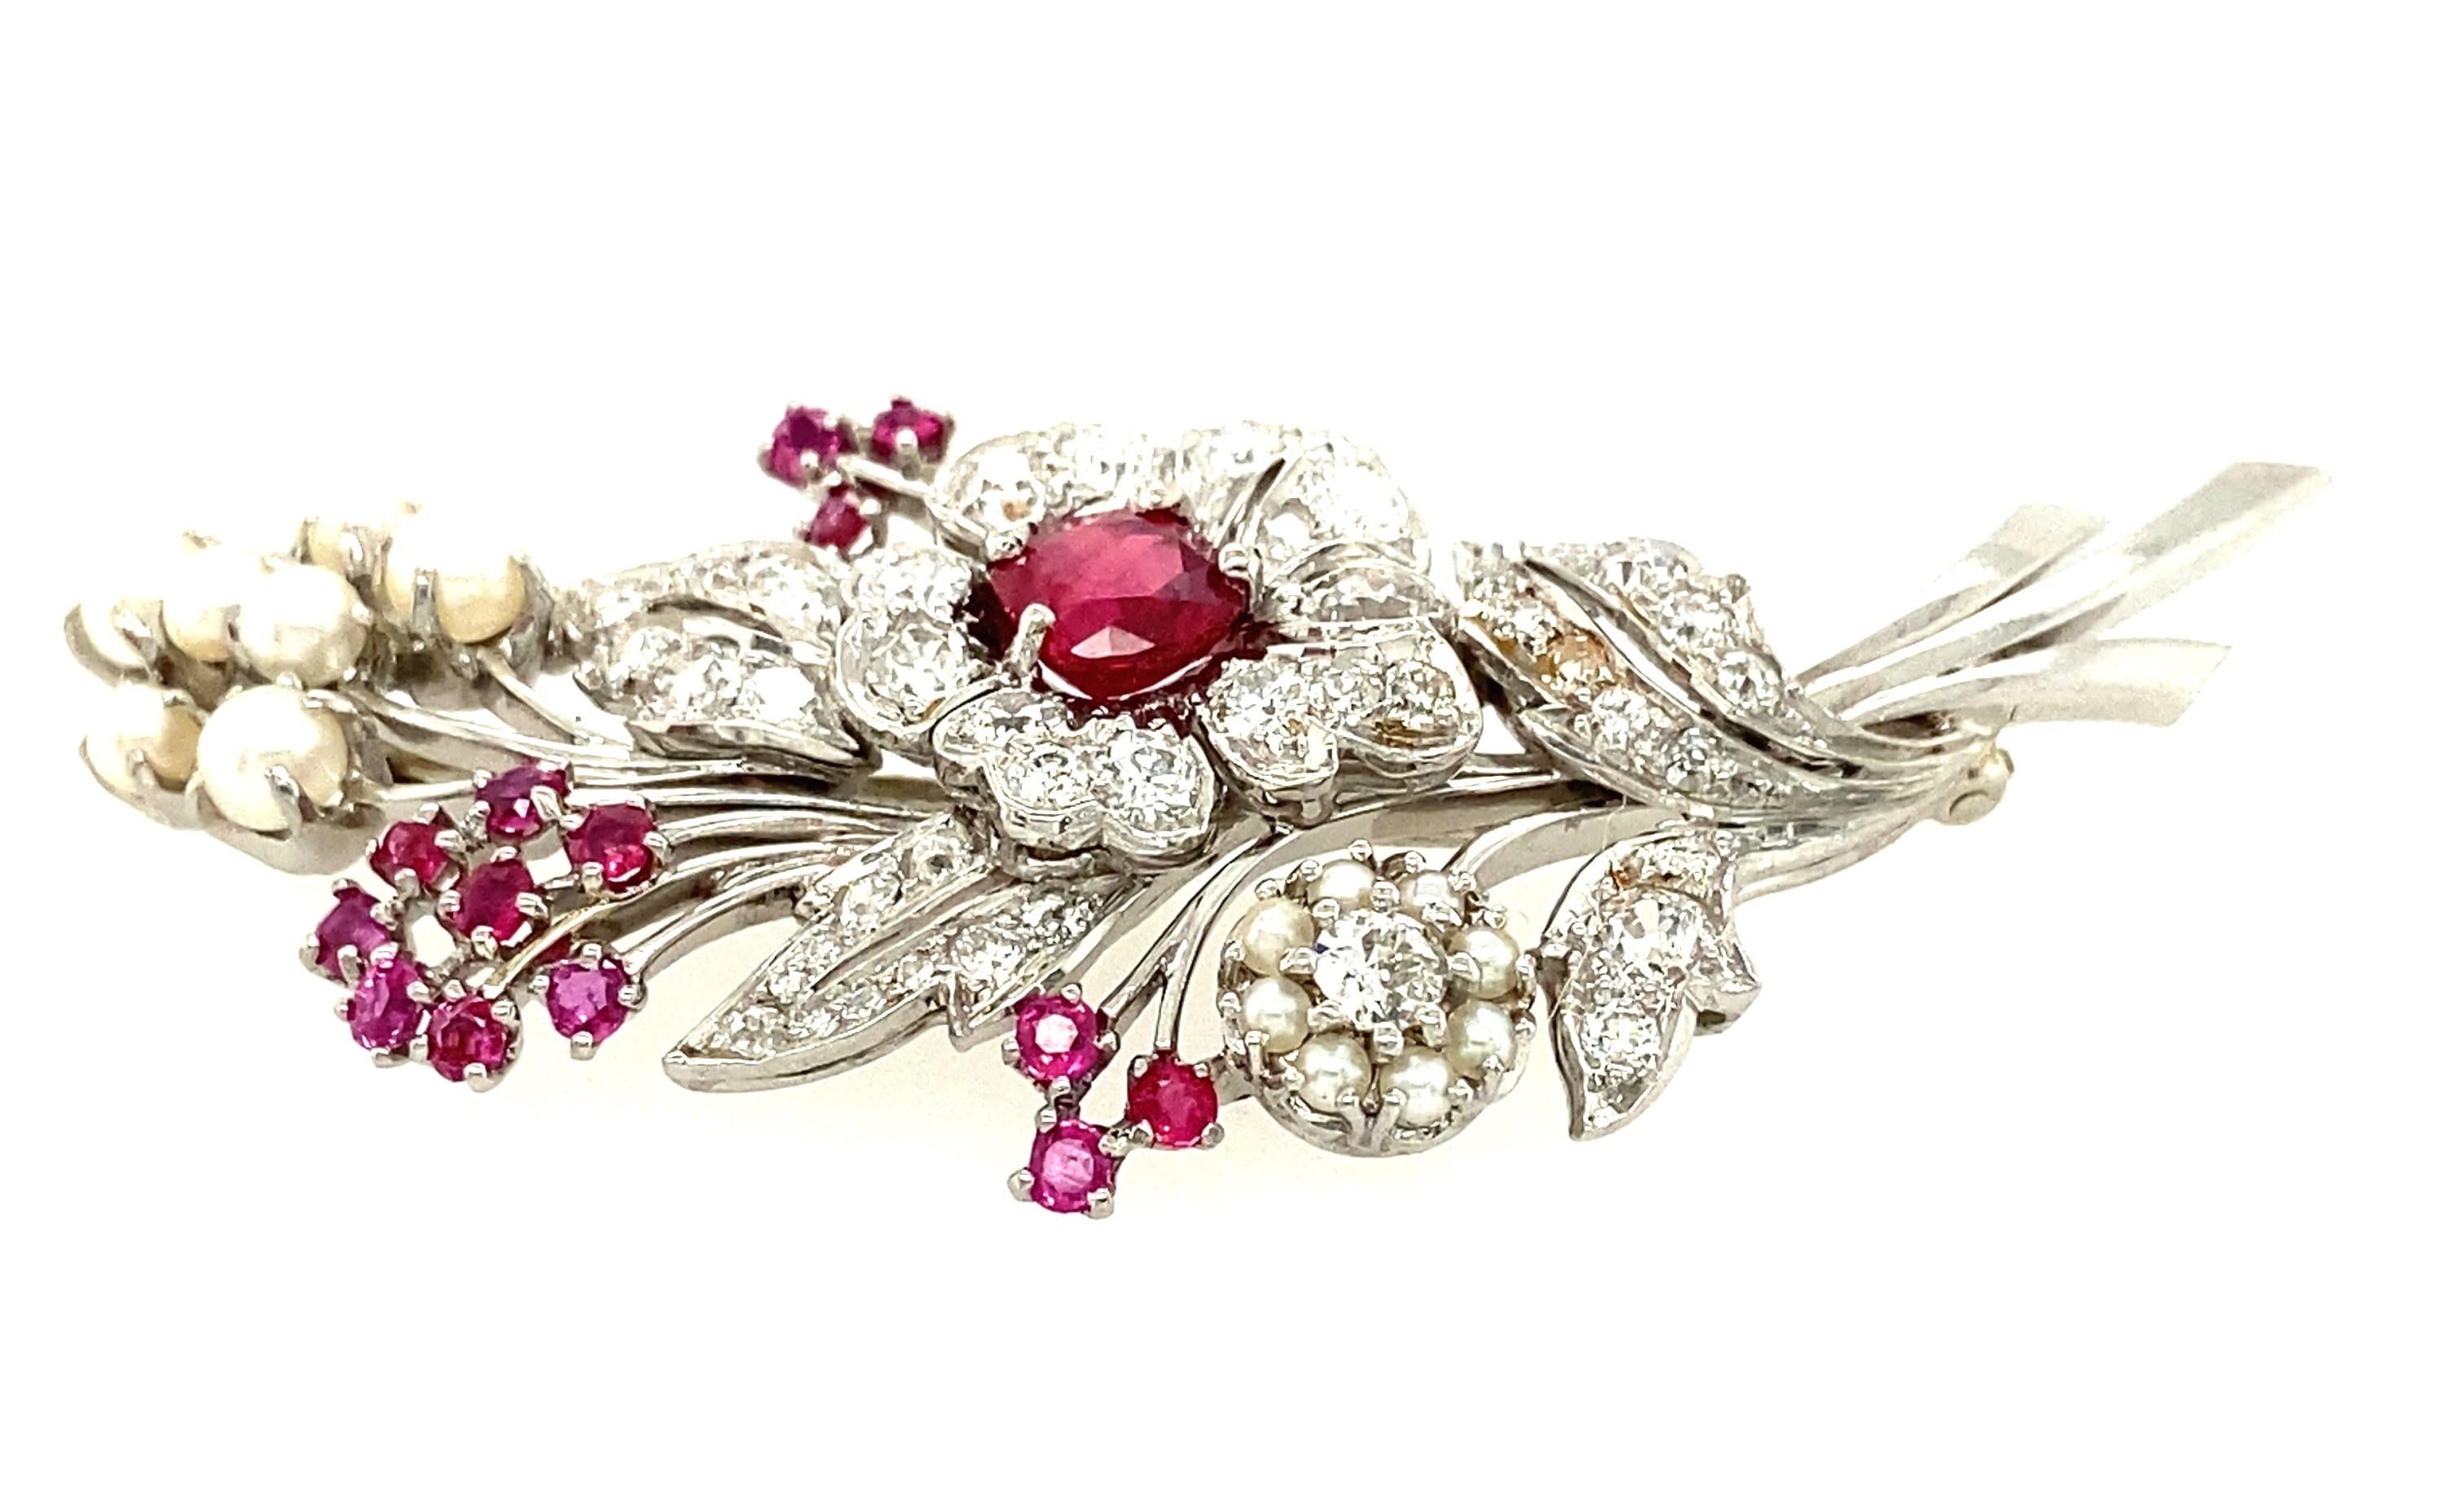 Late Victorian Antique Platinum Ruby, Diamond, and Pearl Spray Brooch, c. 1890 For Sale